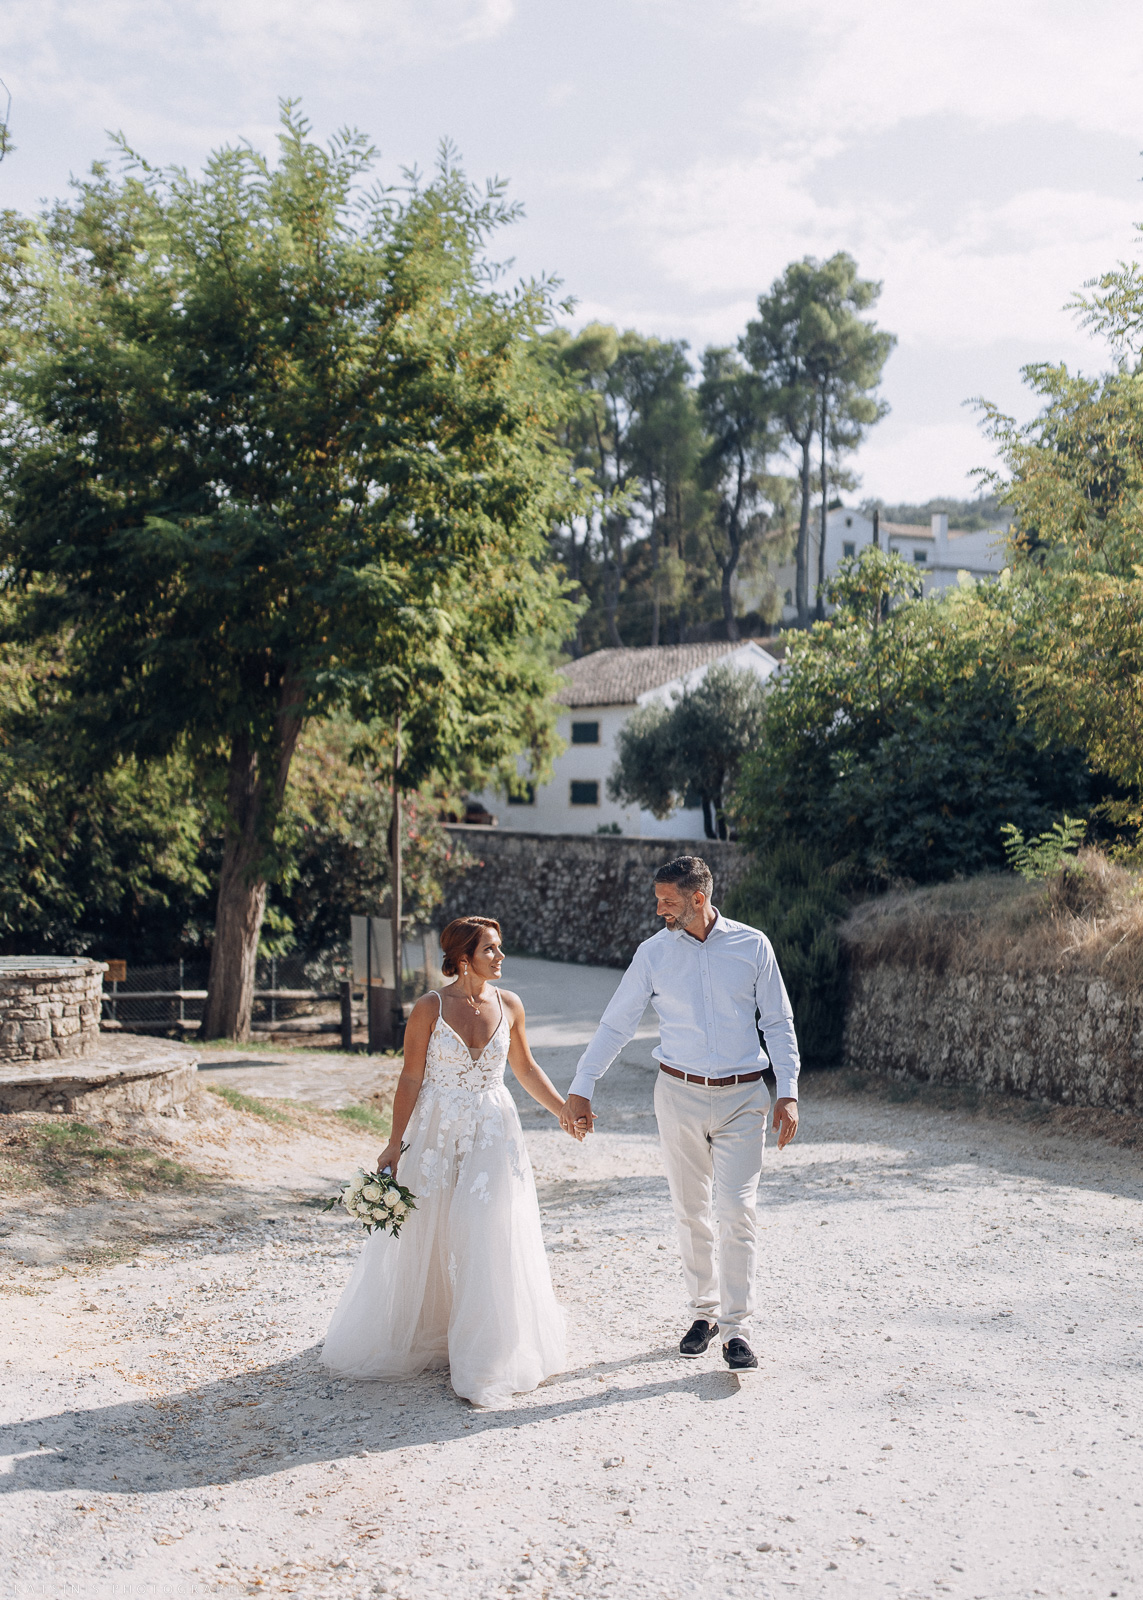 Wedding Photography in Greece, Corfu - Attention to Details